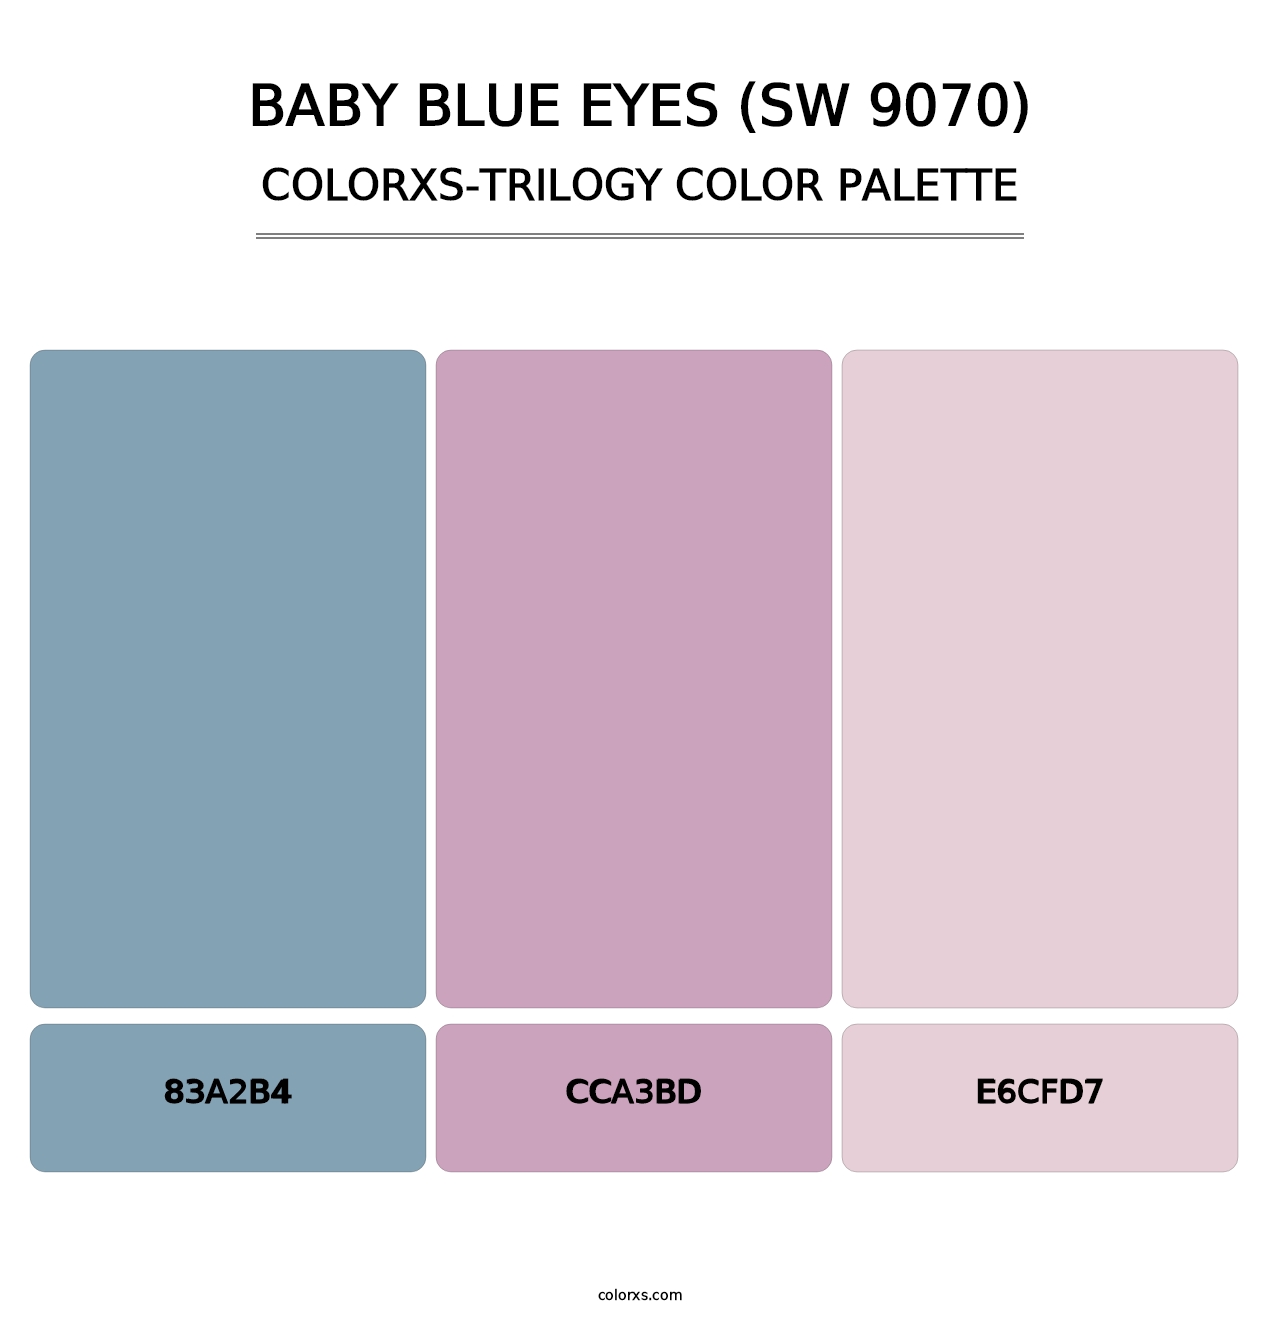 Baby Blue Eyes (SW 9070) - Colorxs Trilogy Palette